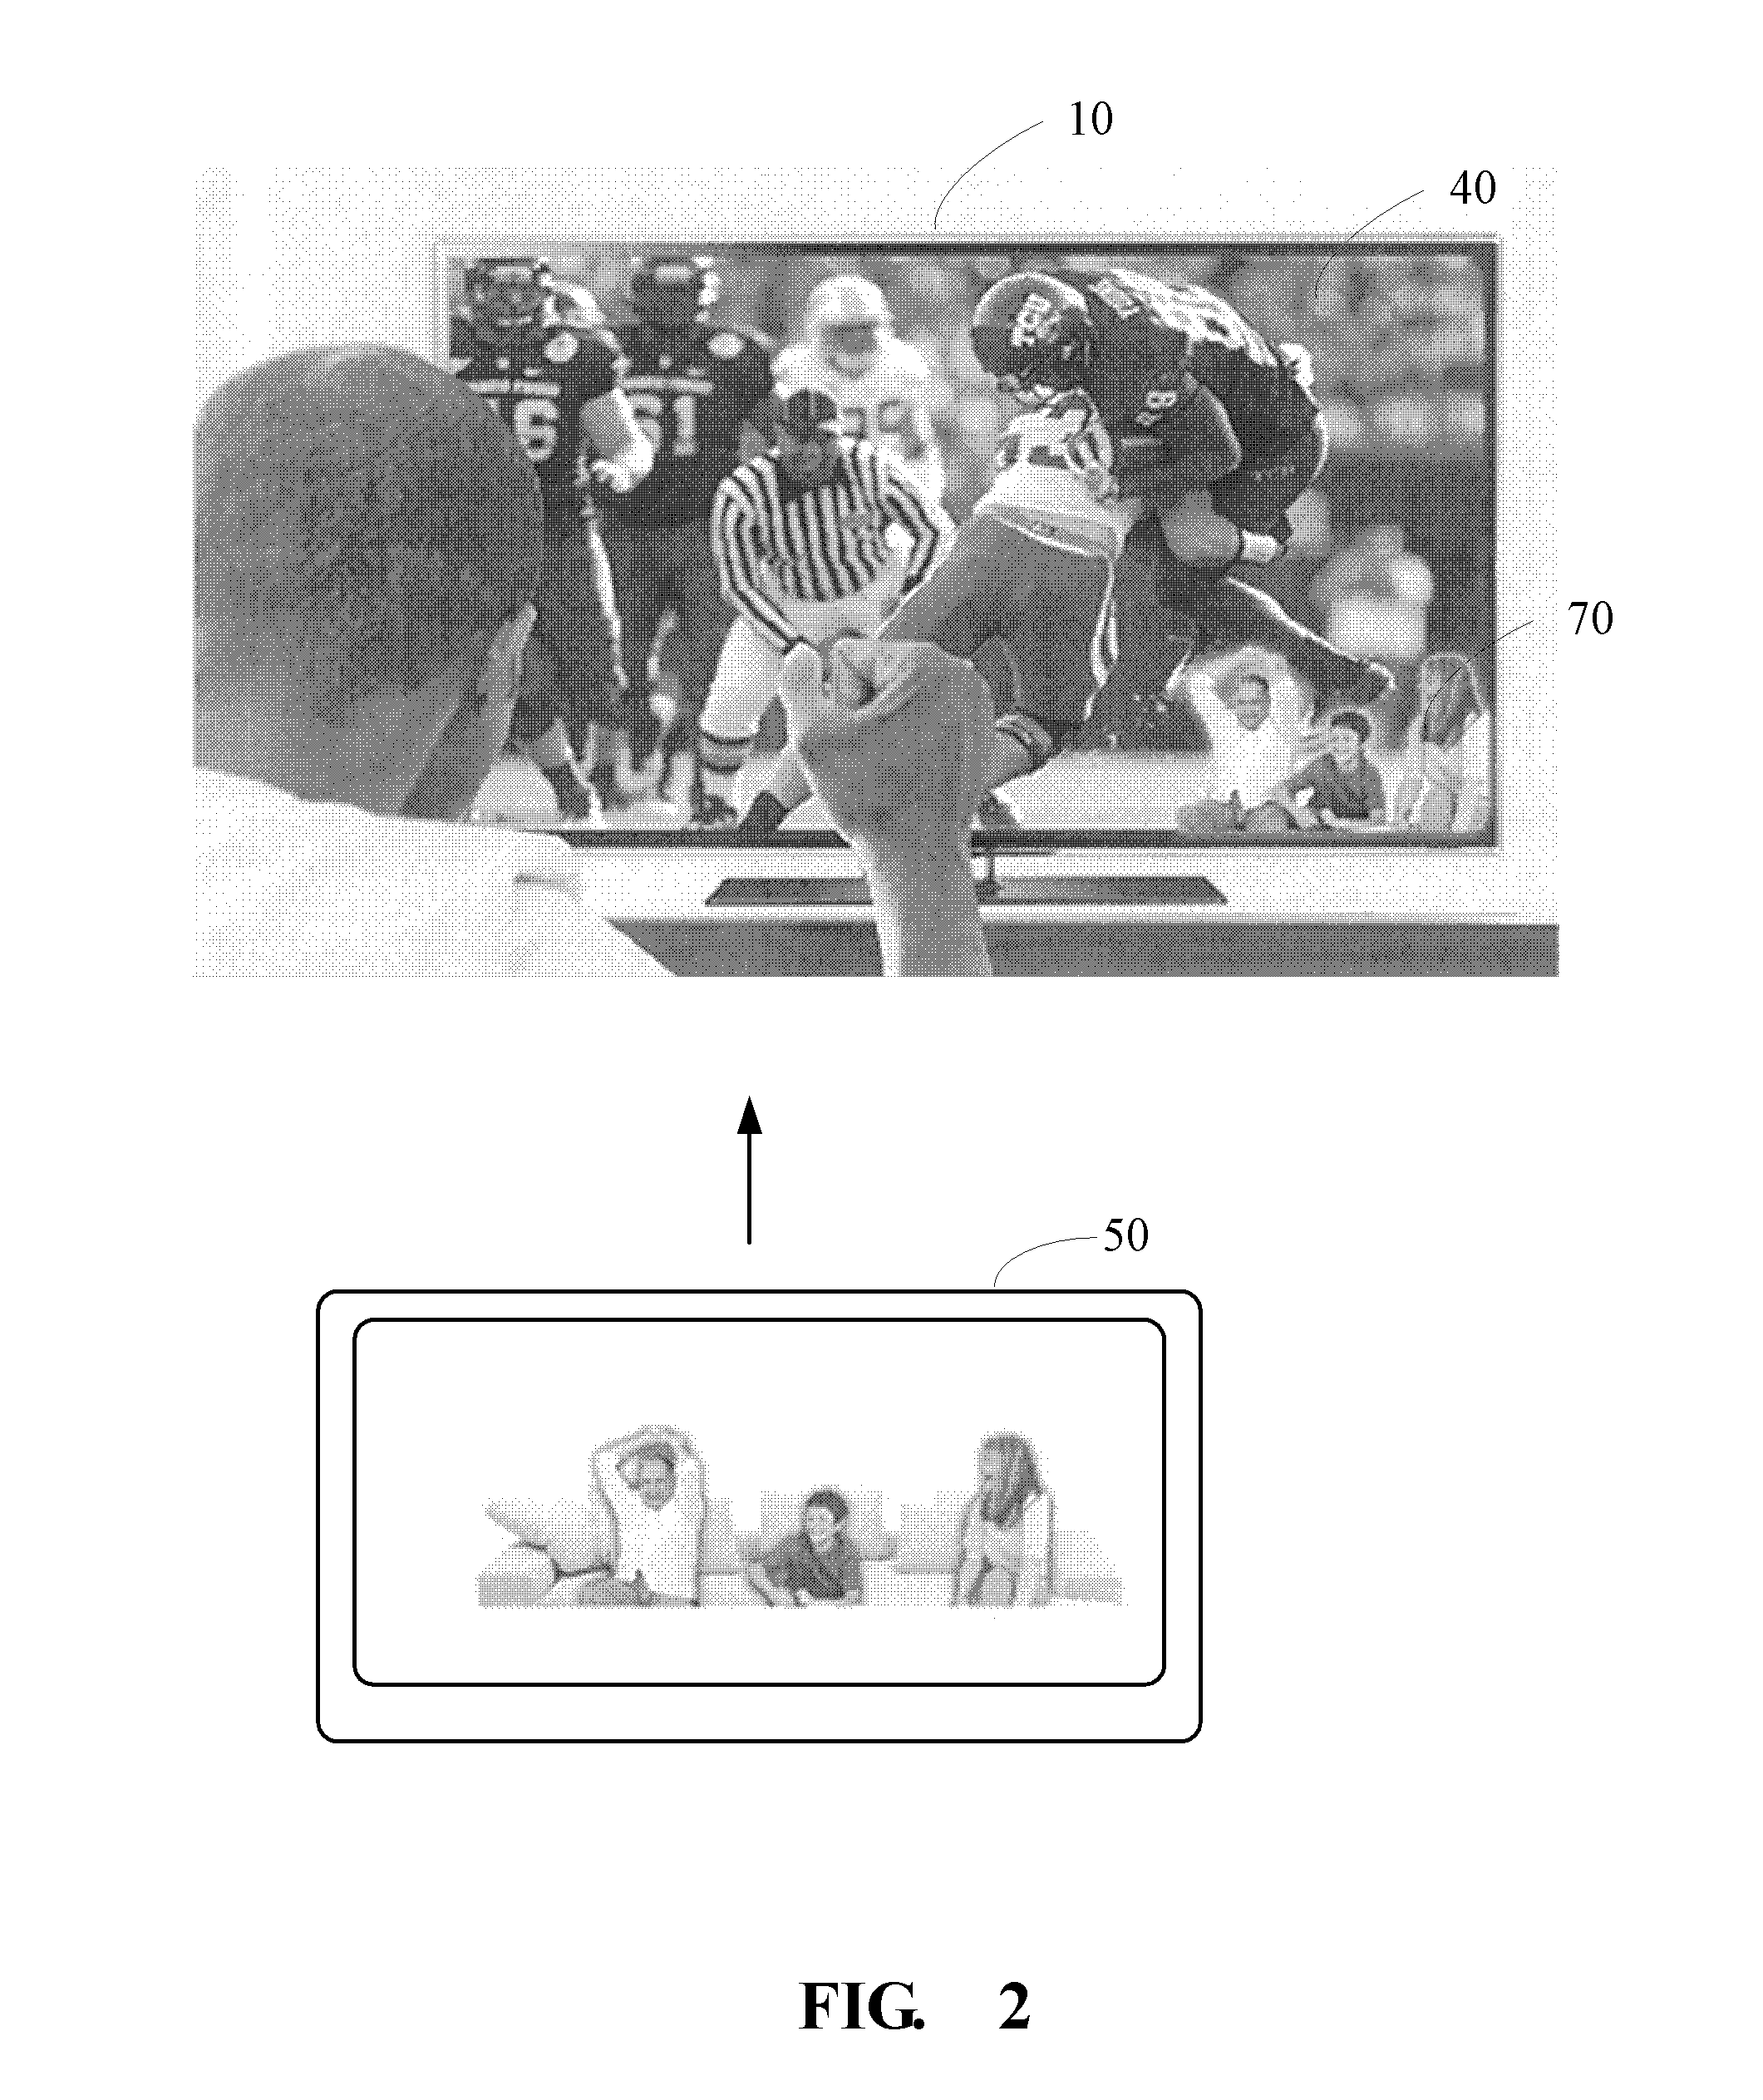 Television and method for displaying program images and video images simultaneously